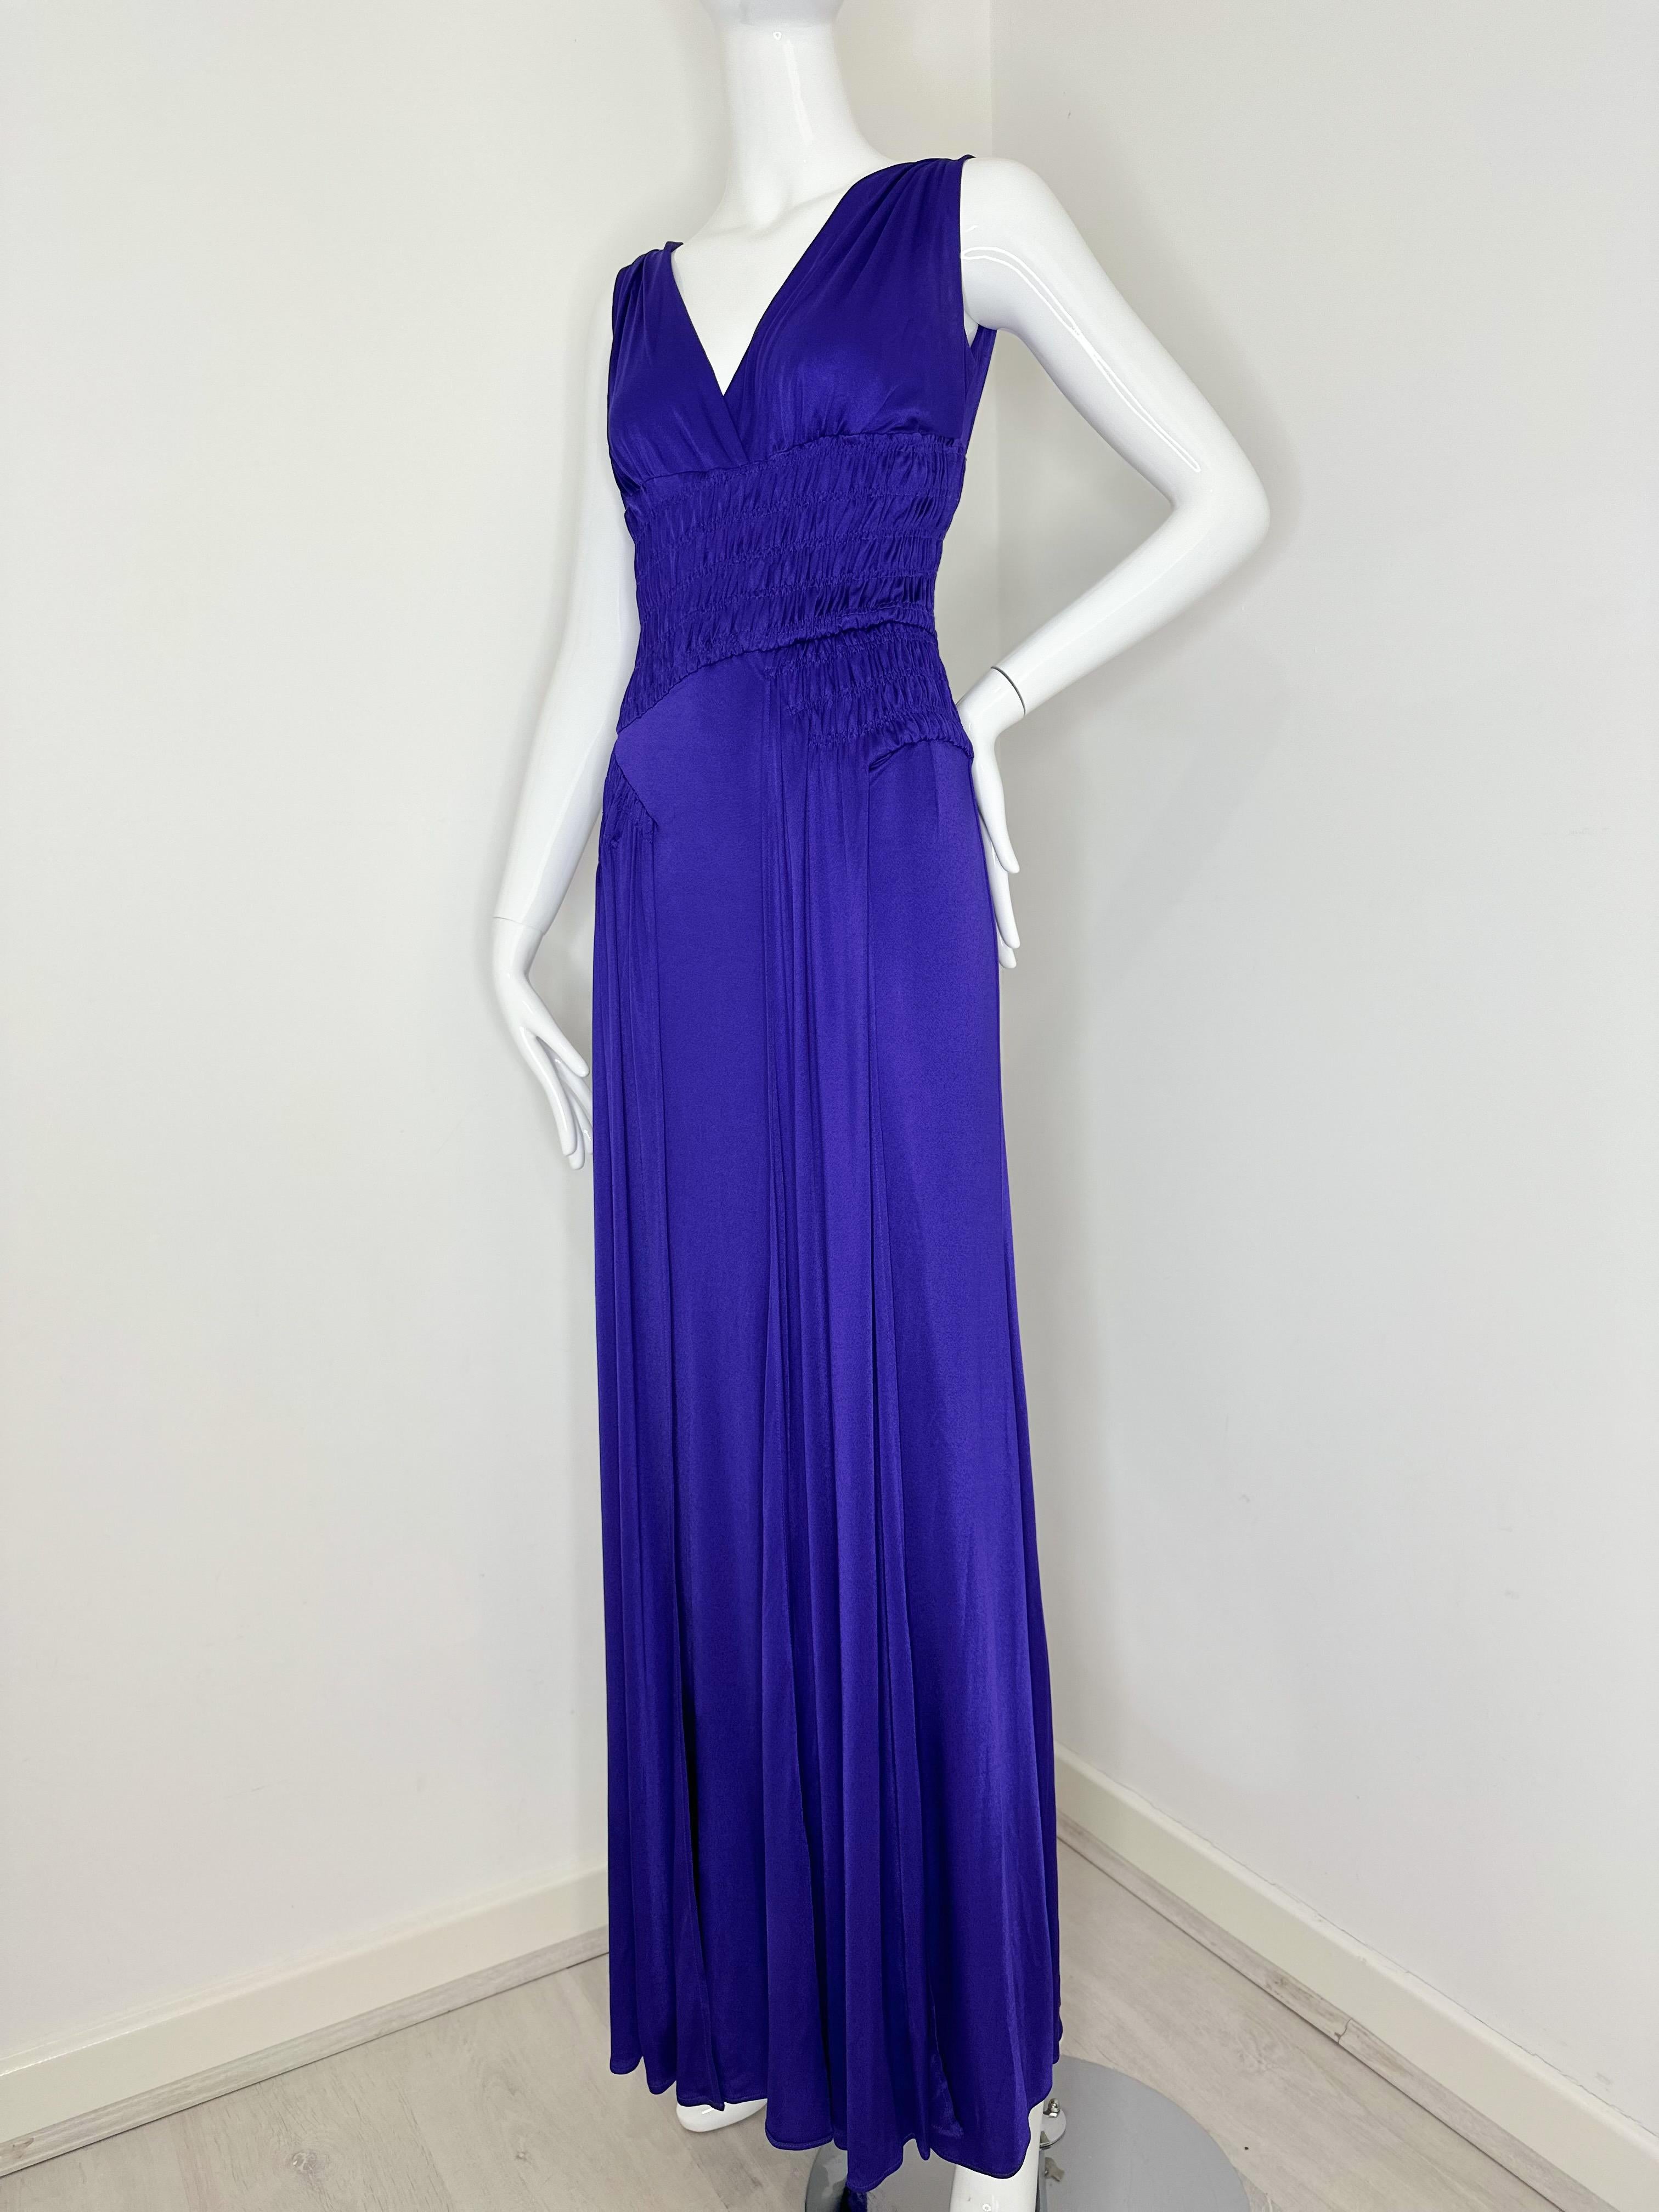 Christian Dior by John Galliano 2009 deep purple gown 
Elastic waist, very soft and somewhat elastic fabric 
Great pre owned condition

Originally $5000